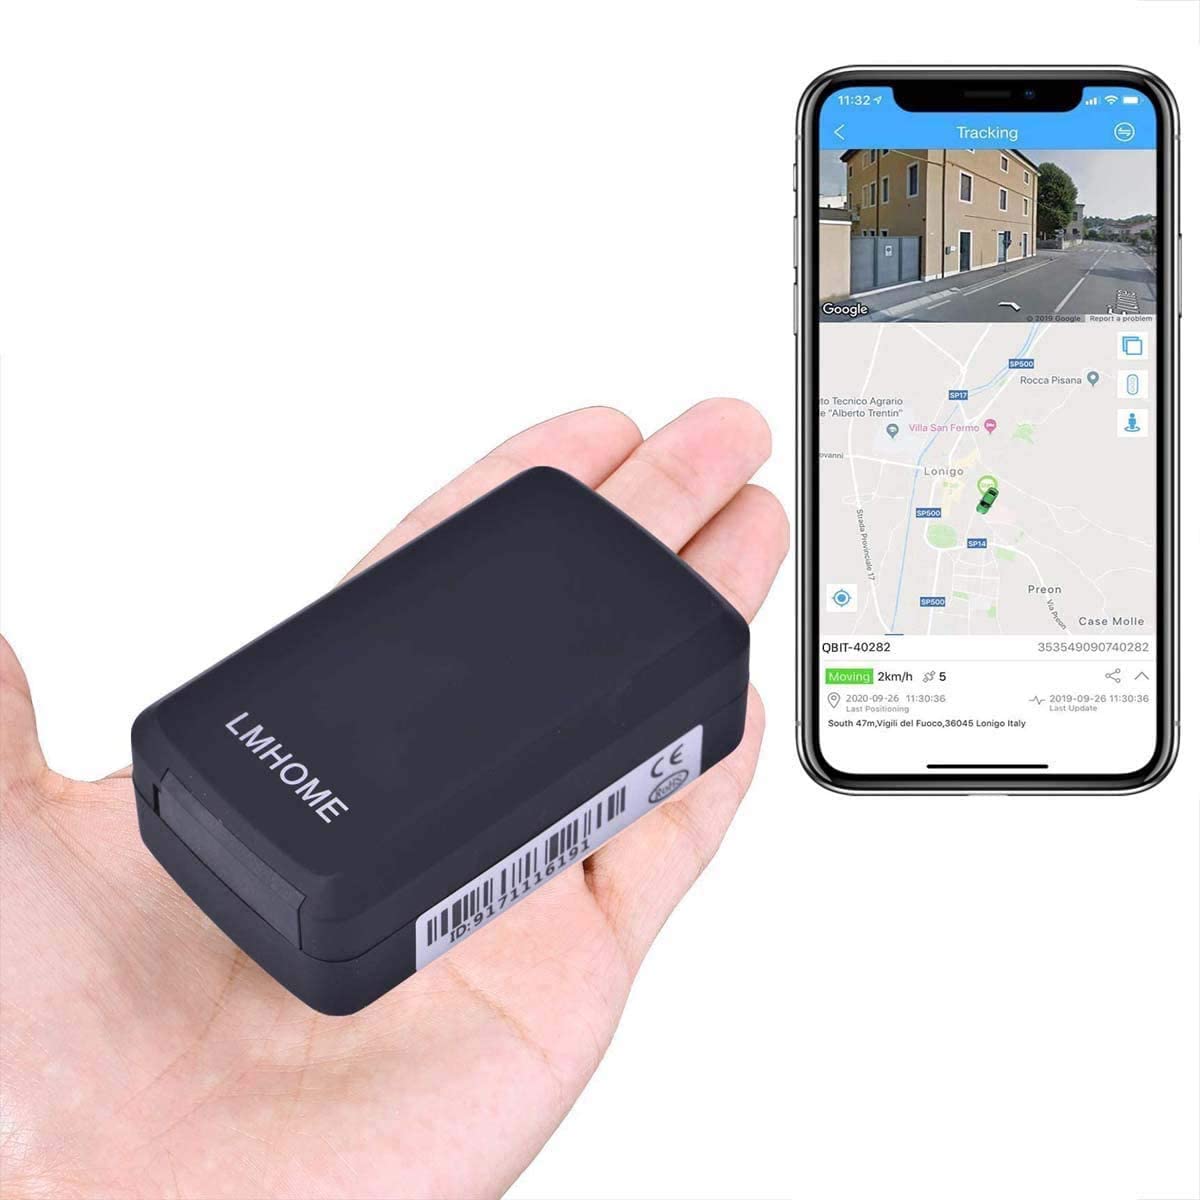 LM002B GPS TRACKER CAR LMHOME 2G RealTime Tracking Voice Monitor GPS Locator 60 Days Long Standby Waterproof Free Web App